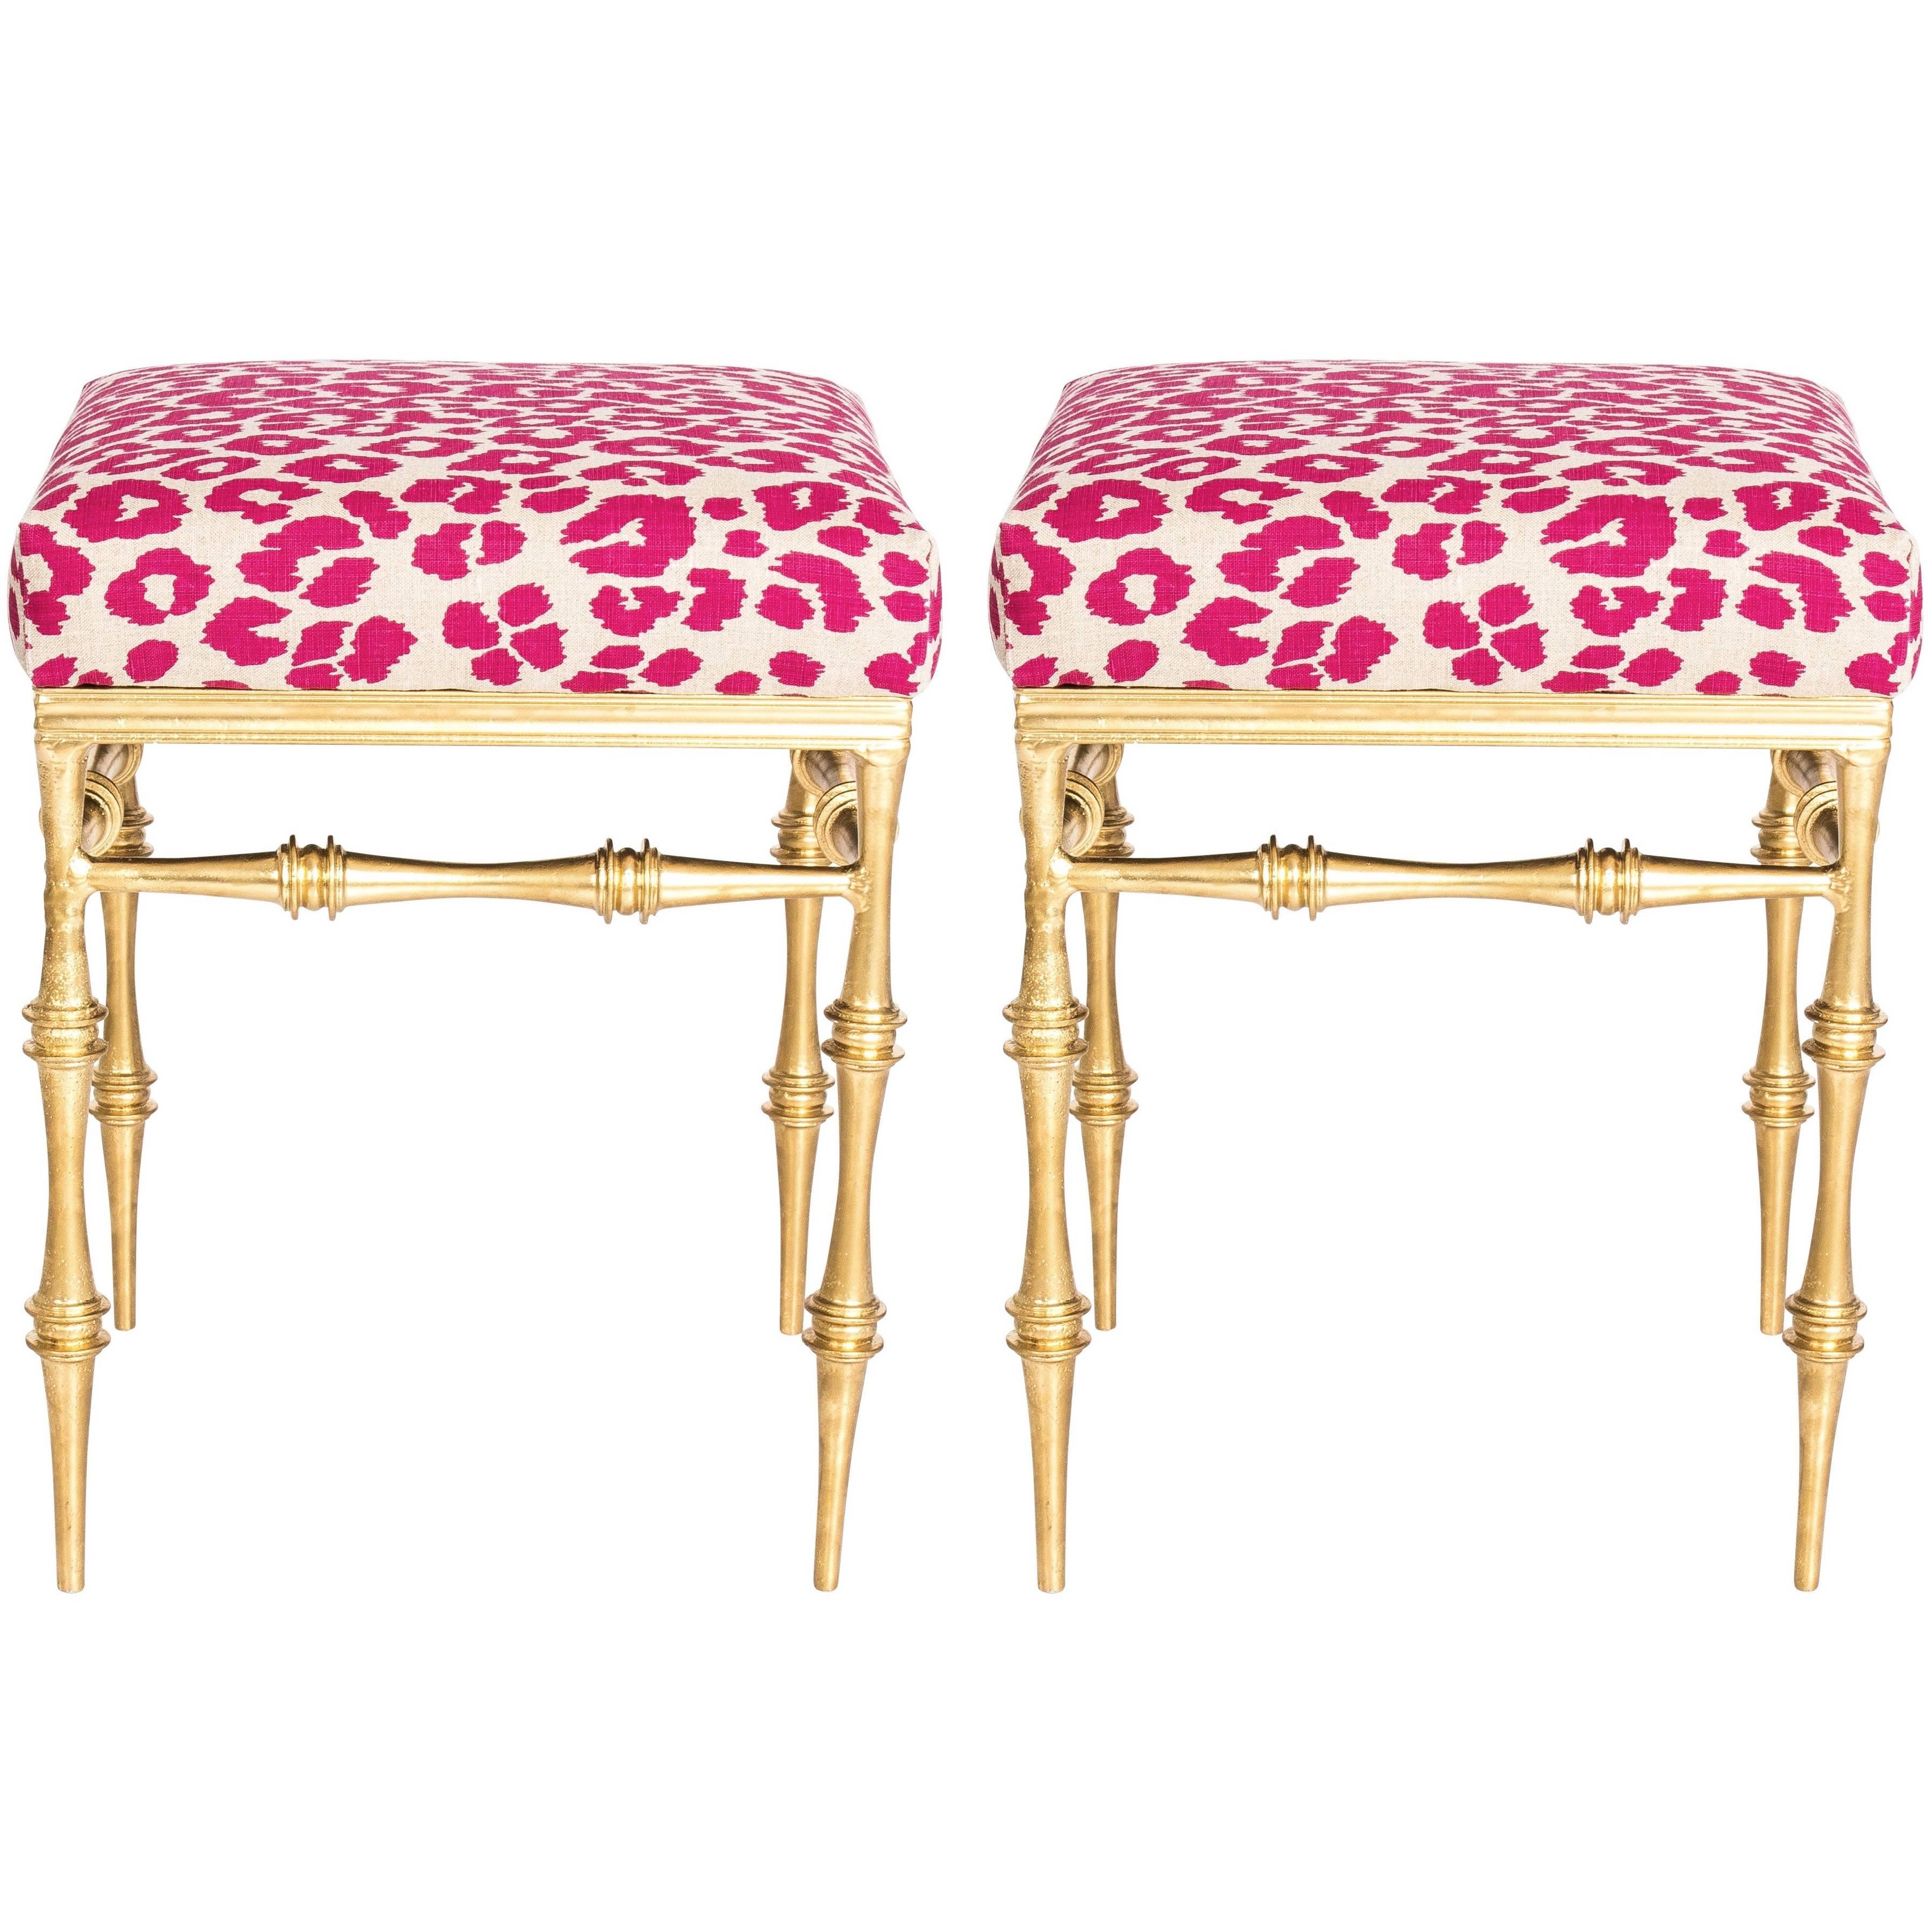 Pair of Gilt Metal Pink Leopard Benches